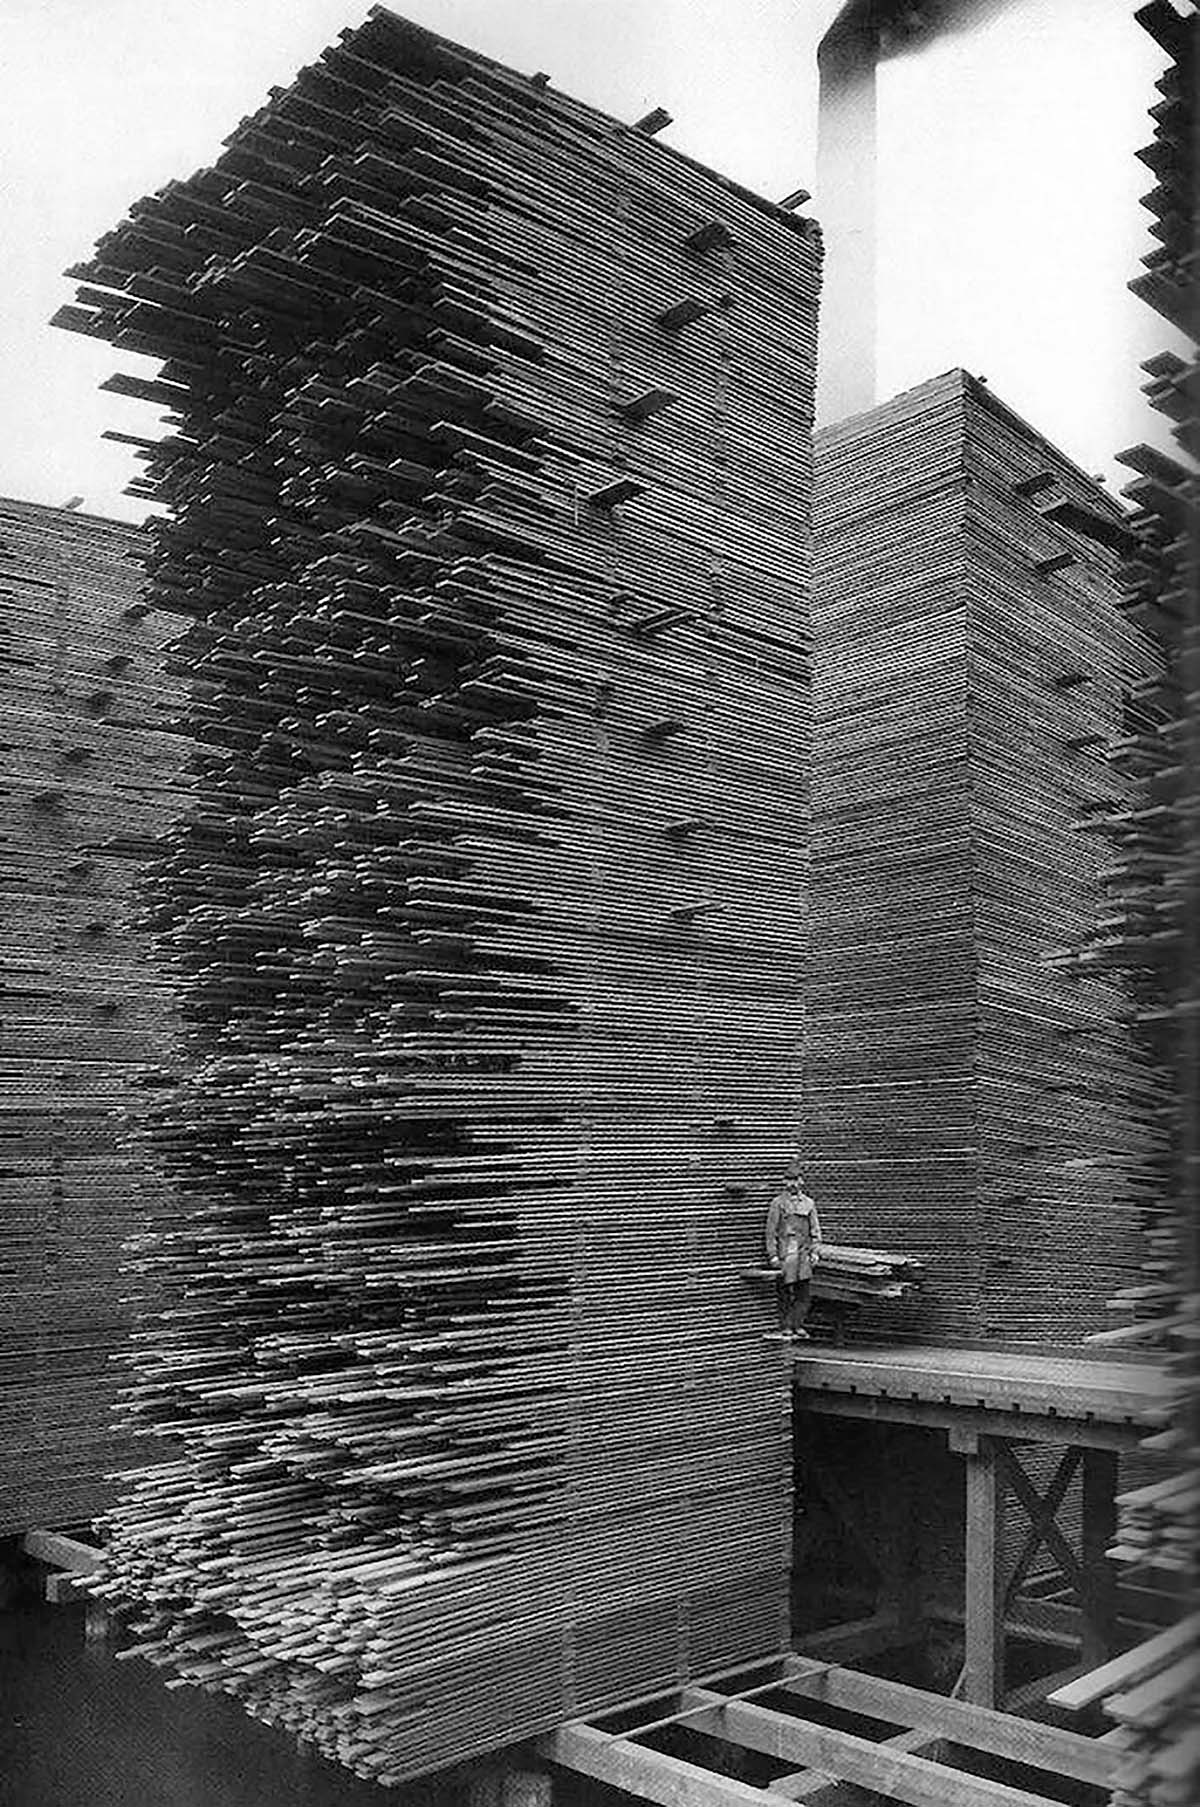  | Stacks of lumber, Seattle Cedar Manufacturing Plant, Ballard, 1958, Photo by Webster & Stevens. Digital Collection: Museum of History & Industry Photograph Collection. Courtesy of the Pavilion of the United States at the 17th International Architecture Exhibition – La Biennale di Venezia